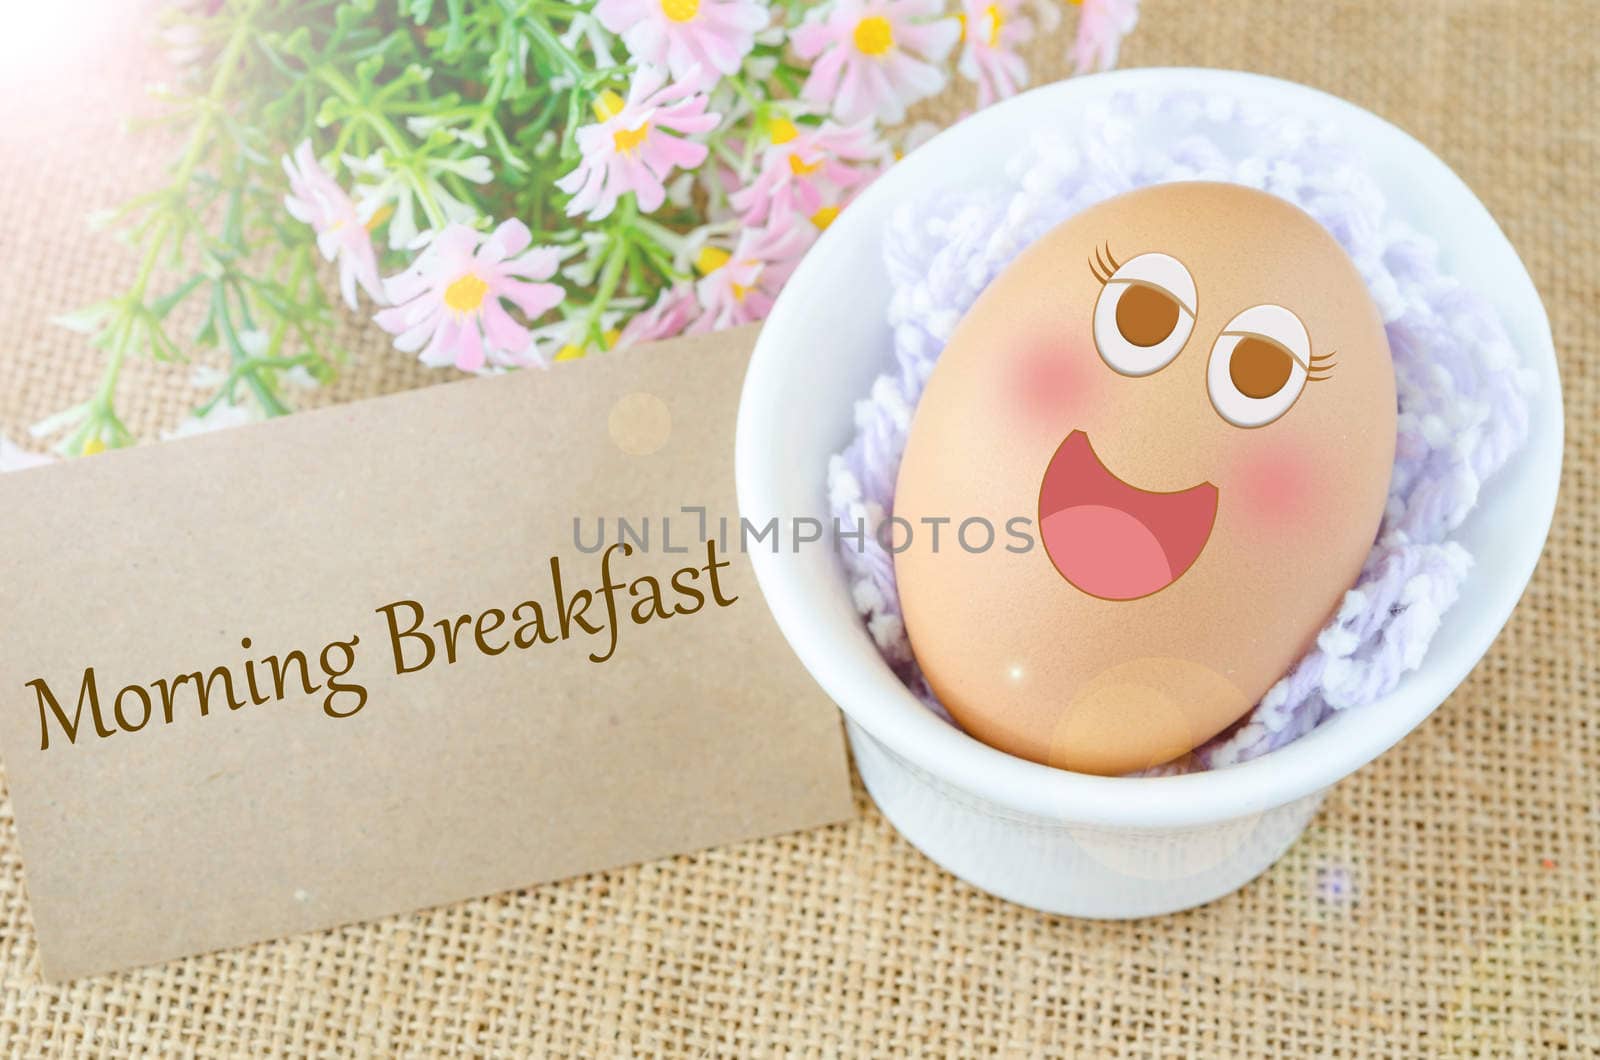 Morning breakfast and smile face egg in white cup with flower on sack background.